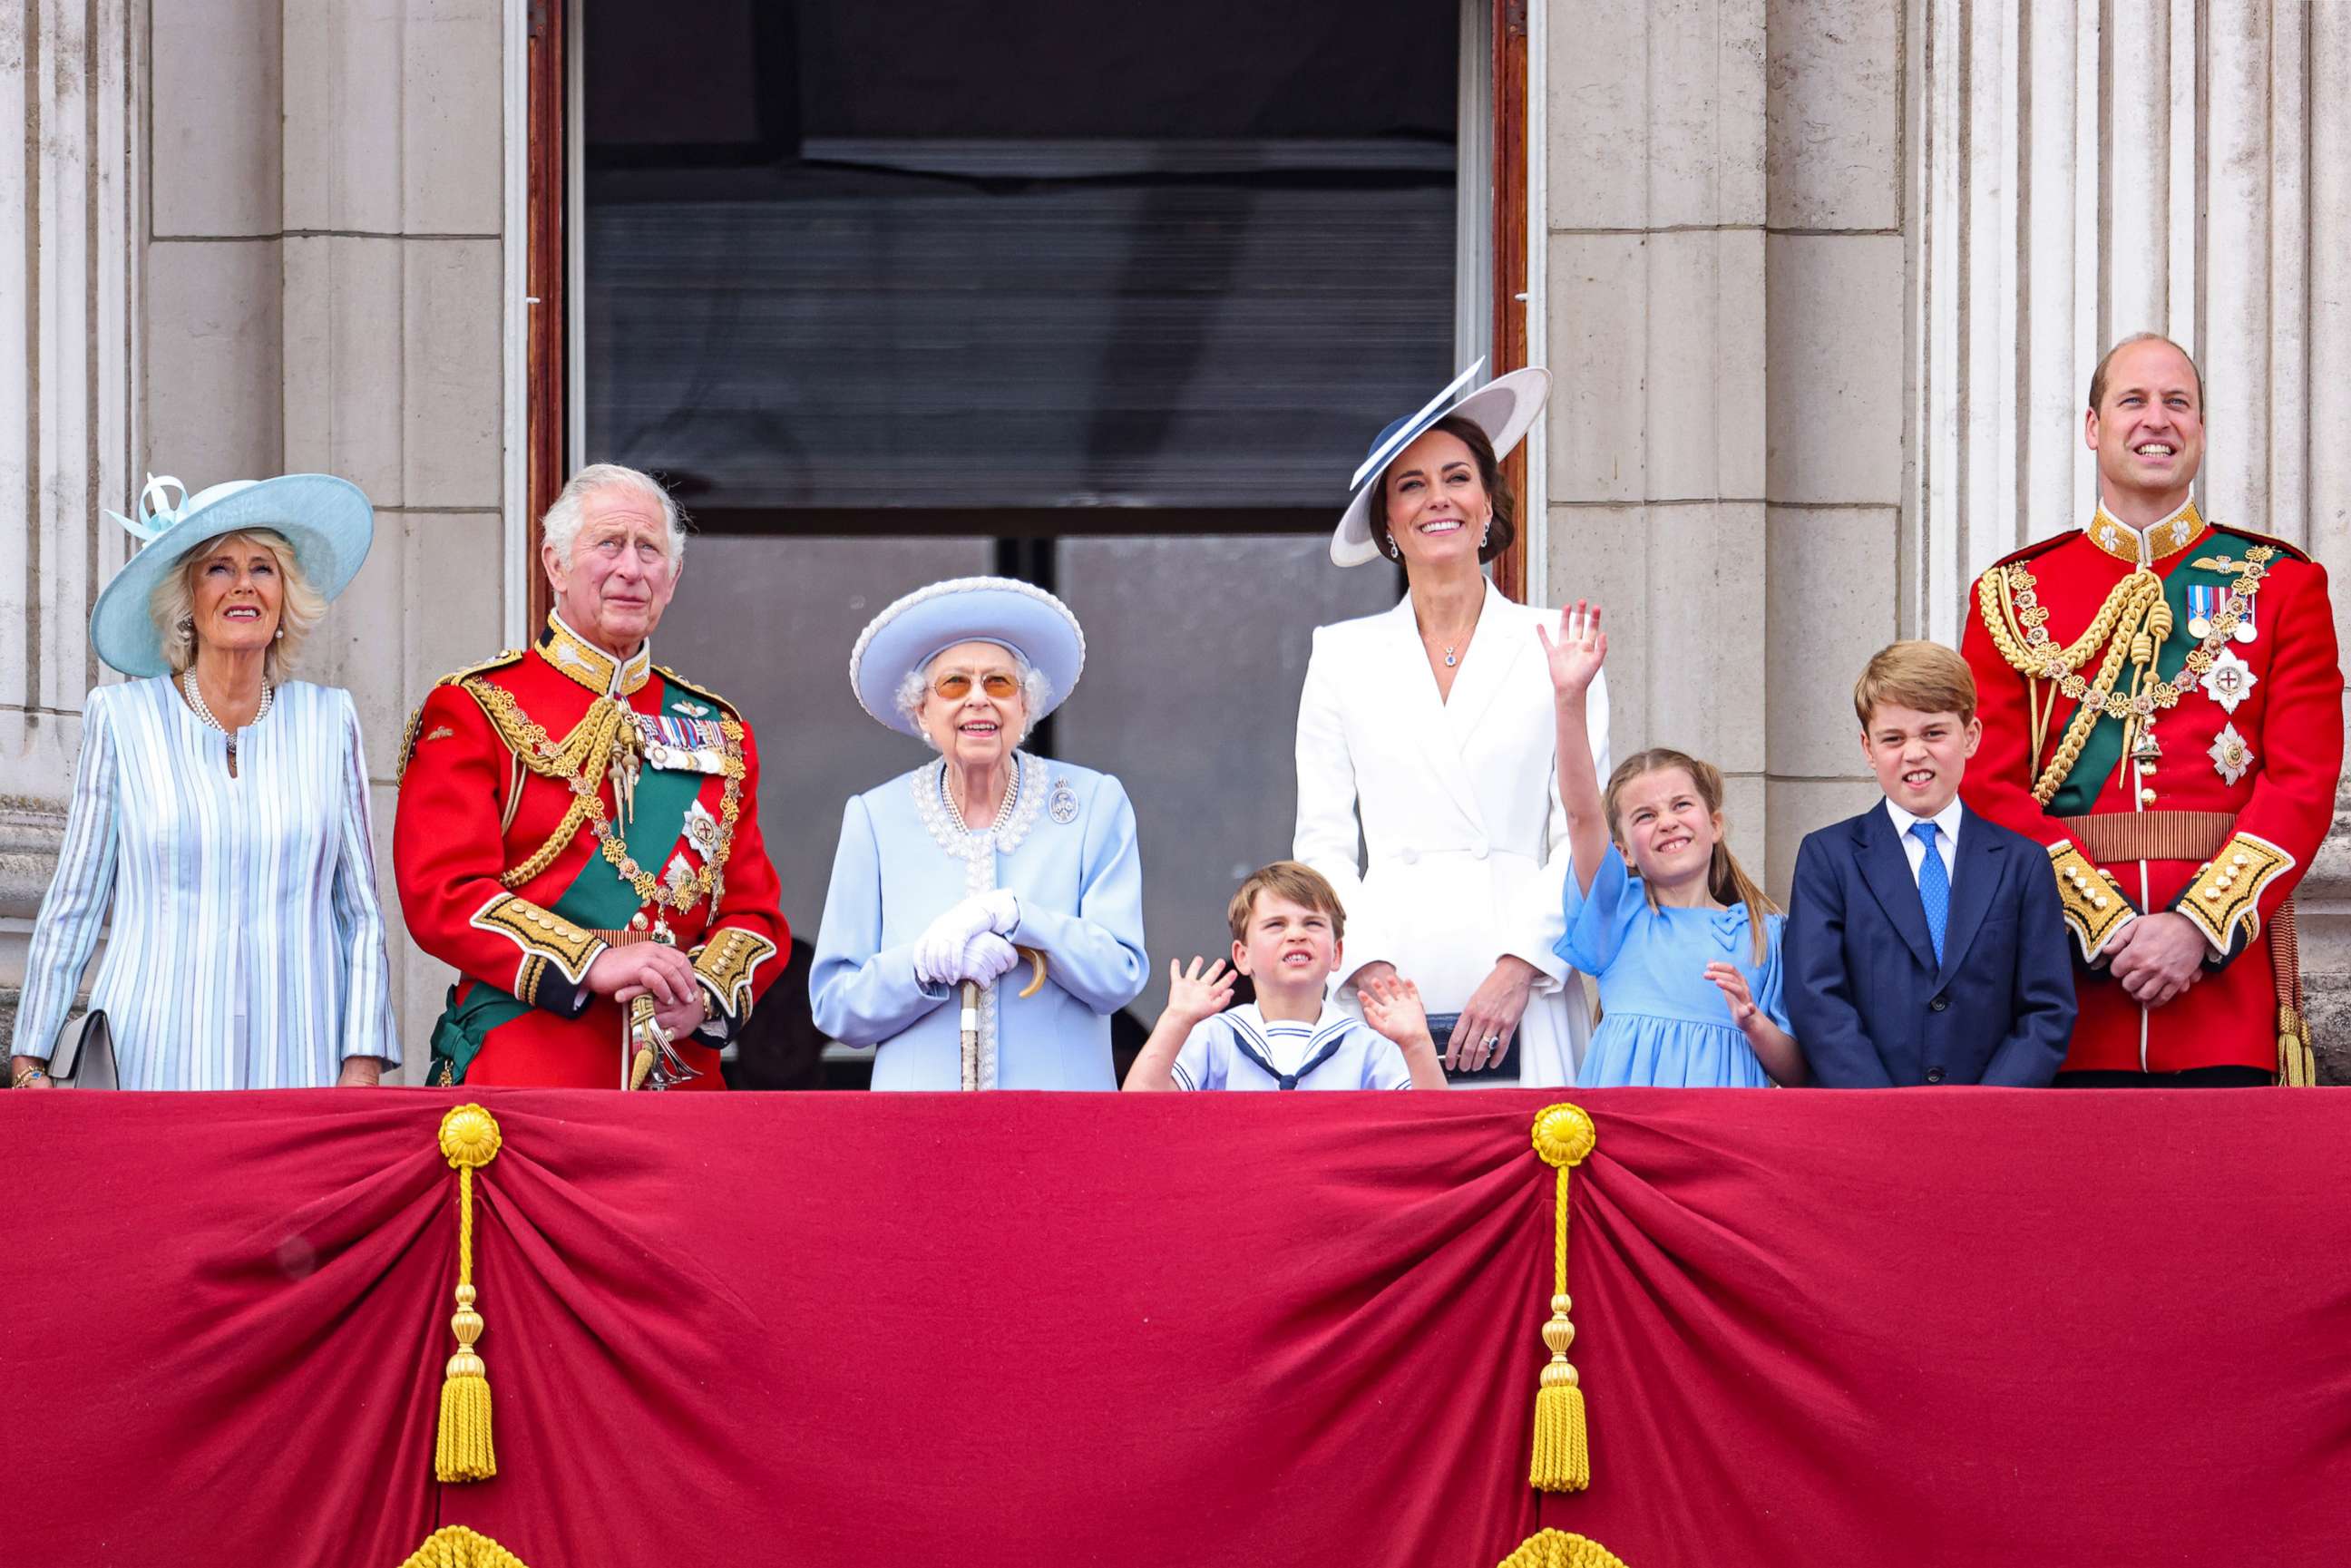 PHOTO: Camilla, Duchess of Cornwall, Prince Charles, Prince of Wales, Queen Elizabeth II, Prince Louis, Catherine, Duchess of Cambridge, Princess Charlotte, Prince George and Prince William, watch the Trooping the Colour parade on June 2, 2022 in London.